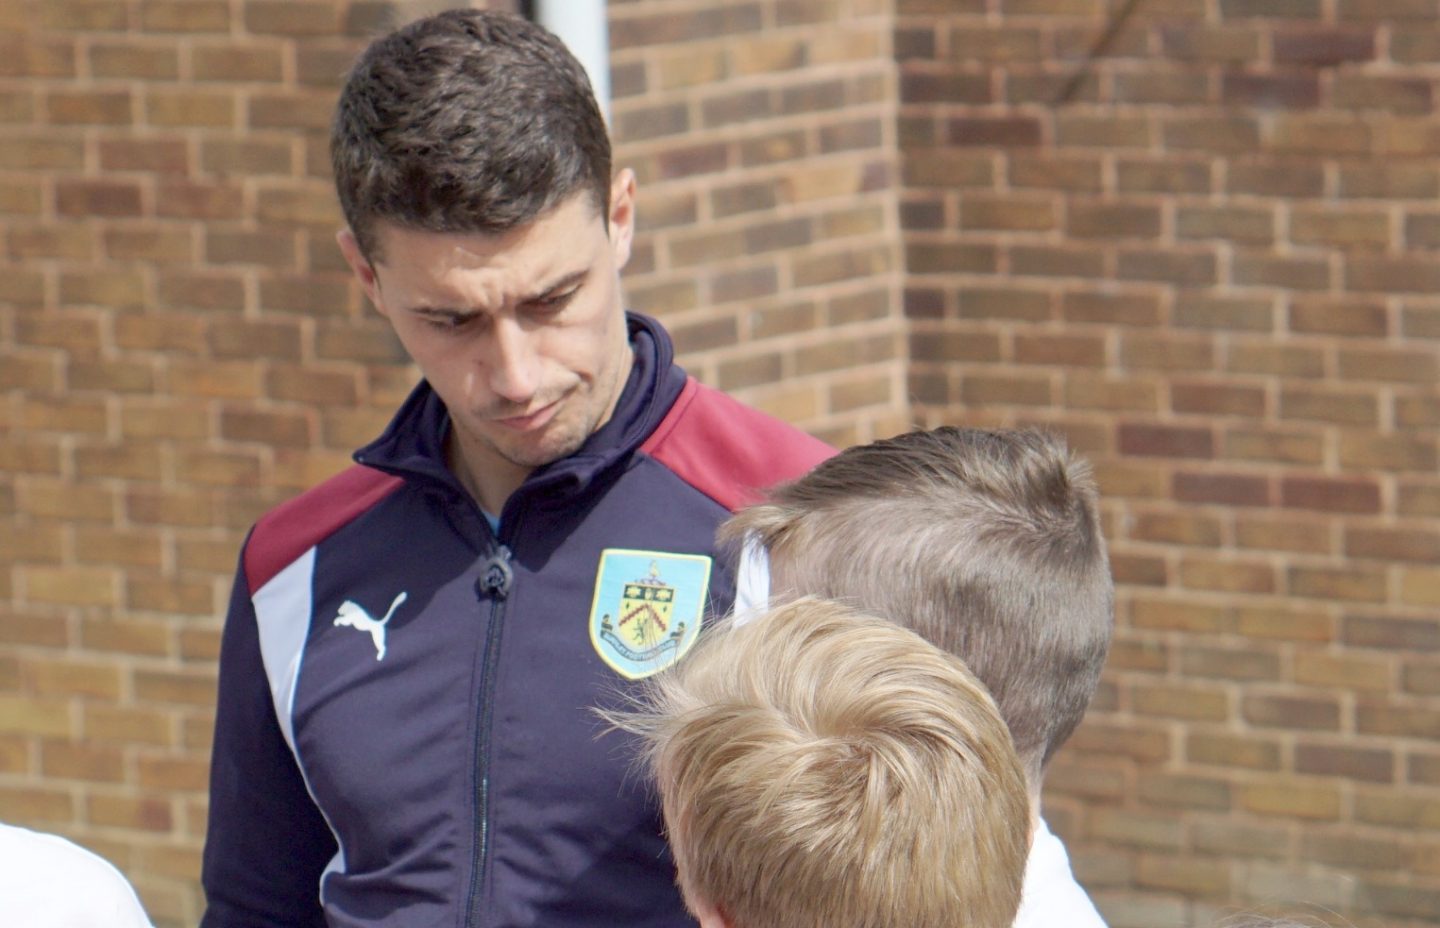 Inspiring Young Minds With Premier League Primary Stars